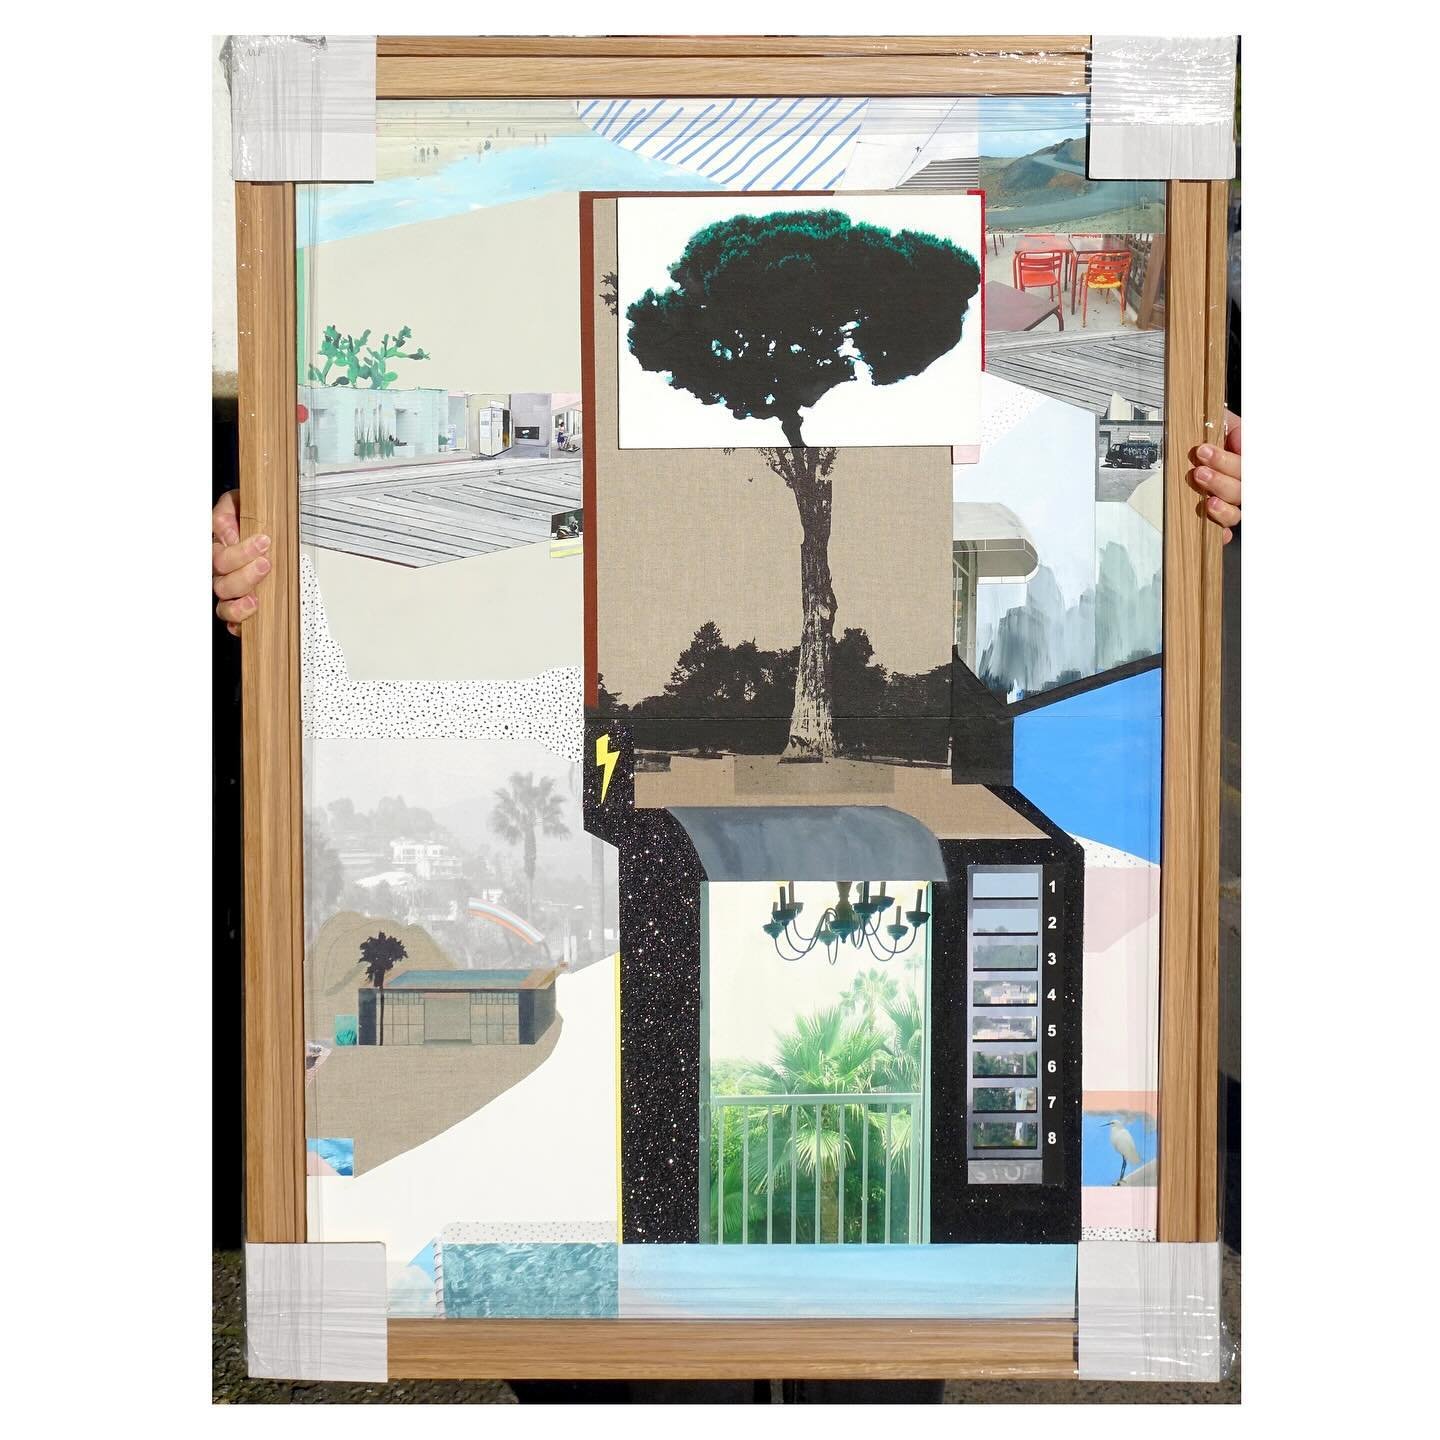 Straight from our framer the brilliant @thekemptownframer and off to @affordableartfairuk #hampstead is this brilliant new original collage from the fabulous Steph Burnley @bonnieandclydeart - see this on our stand F4 :) Replenish
80 x 110 cm
Mixed m